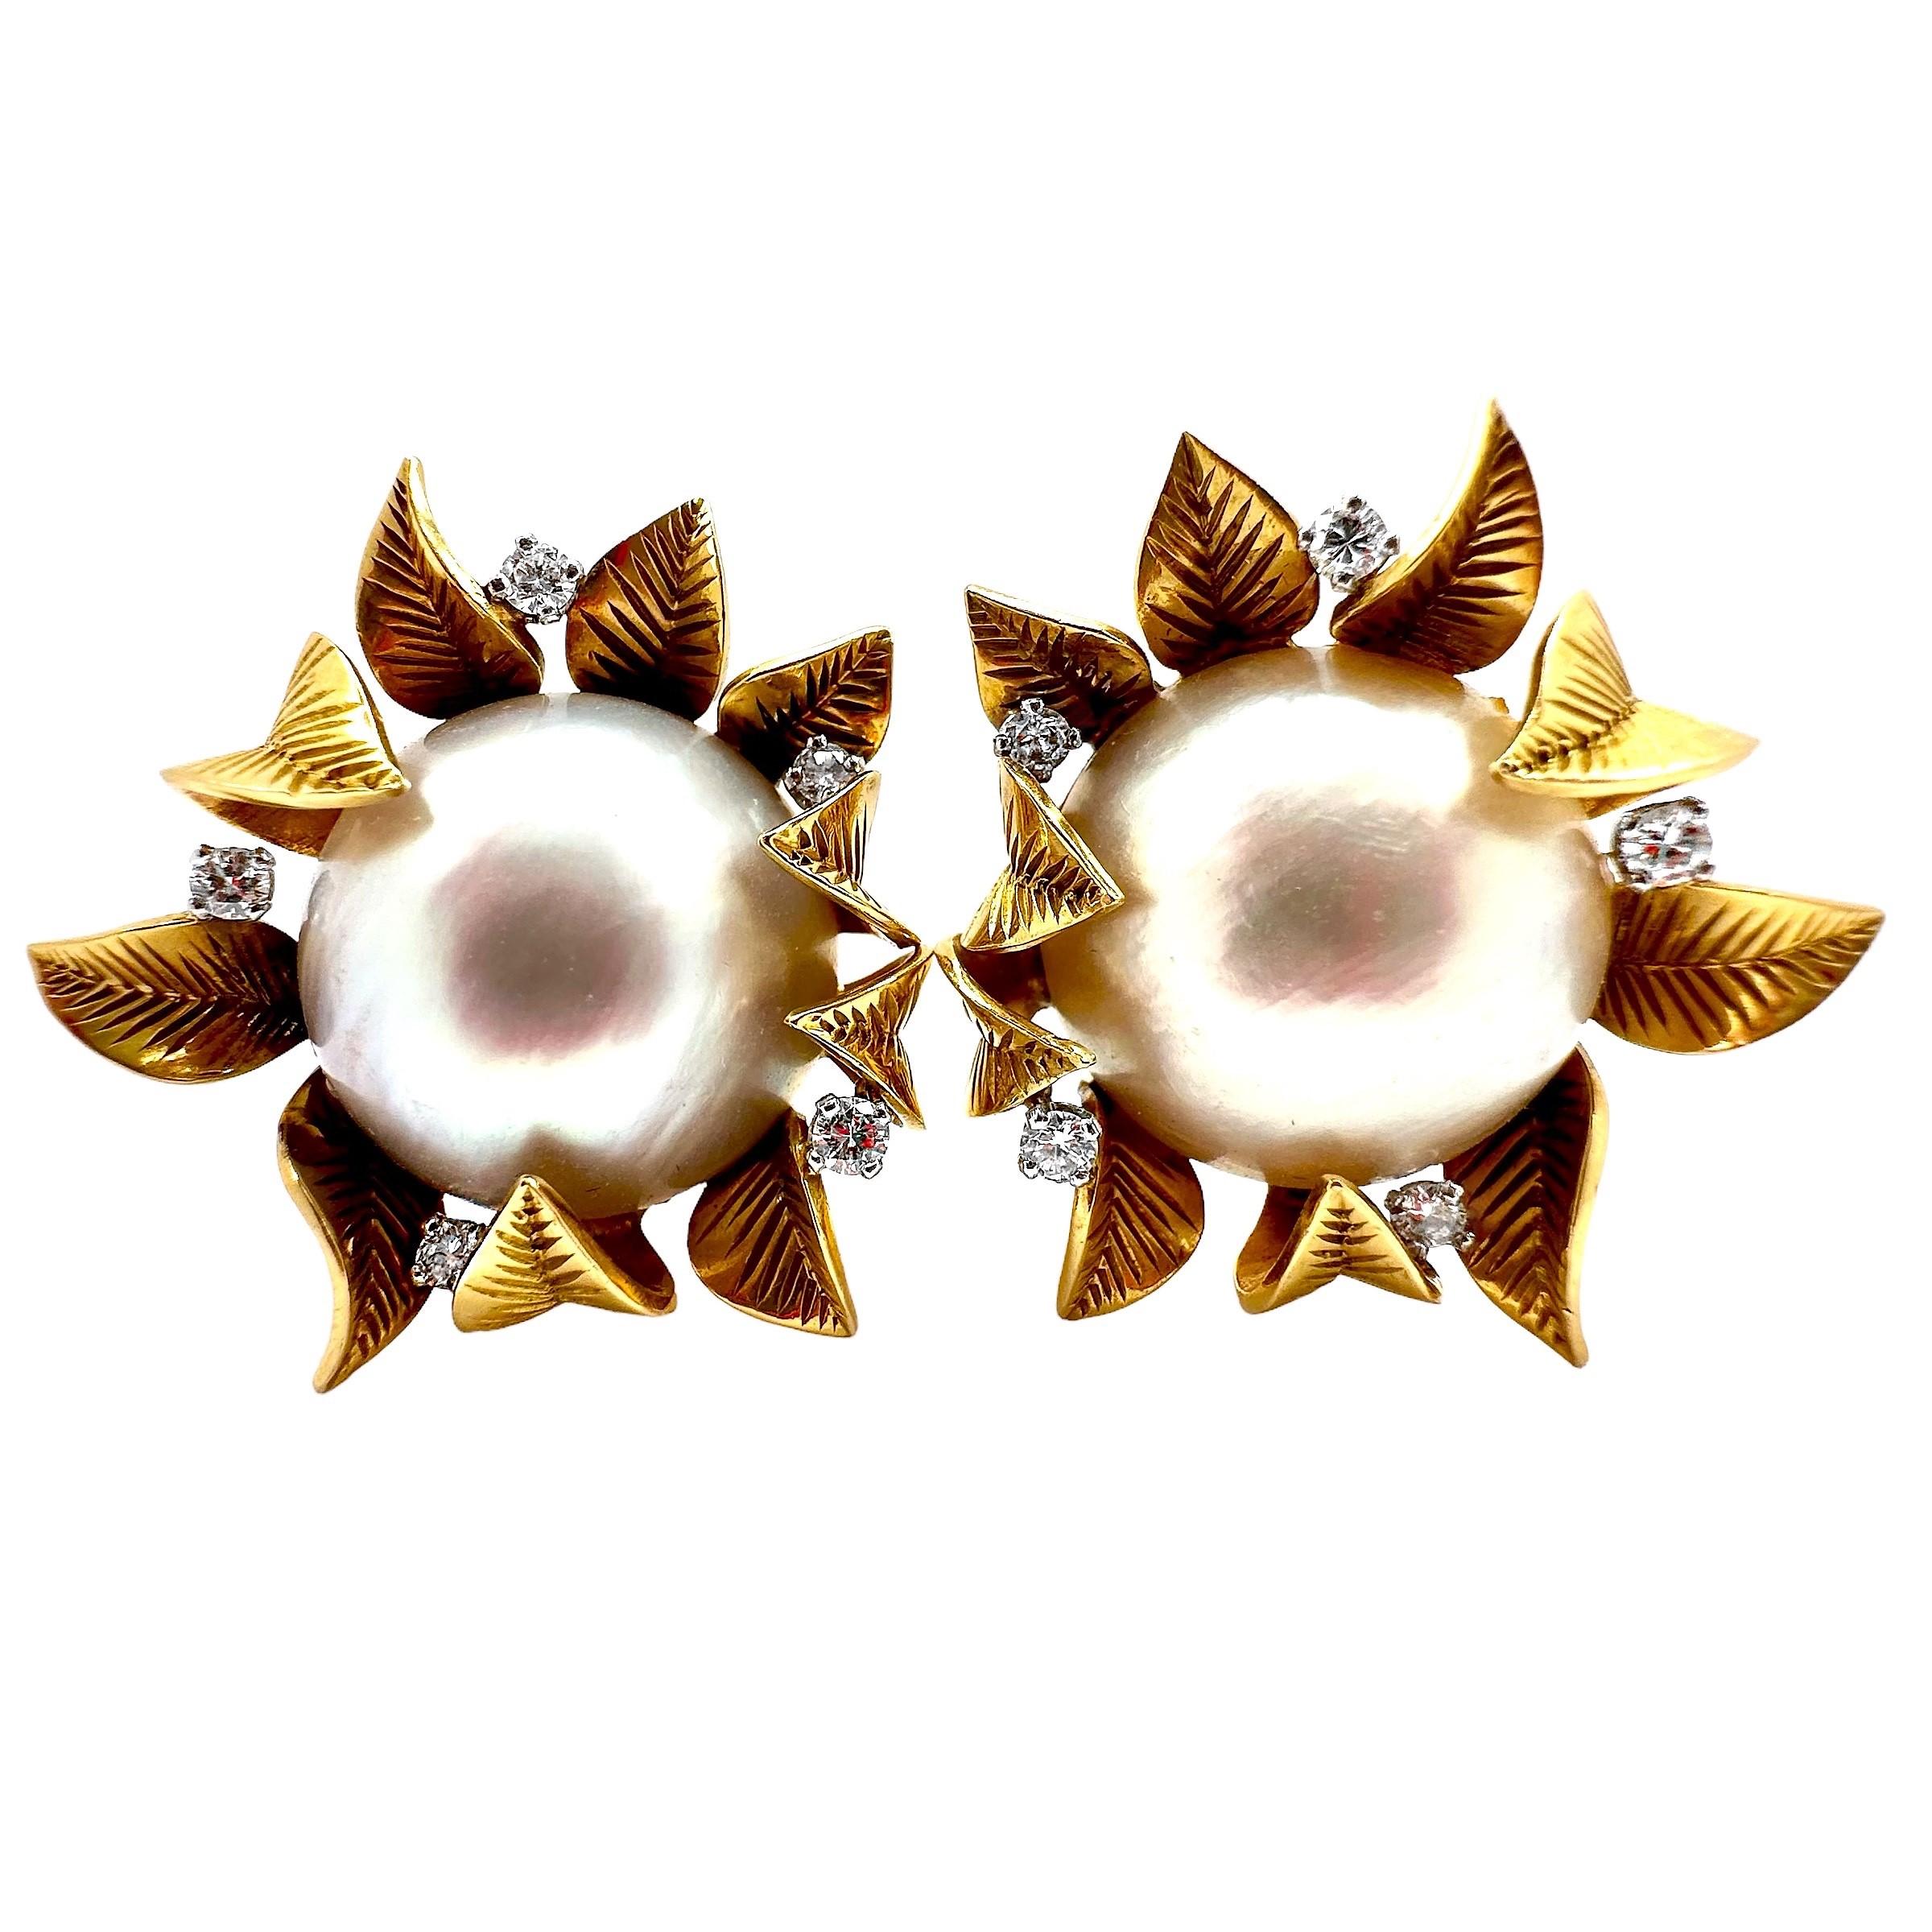 French 18K Gold Earrings with Mobe Pearls Surrounded by Leaves and Diamonds For Sale 4